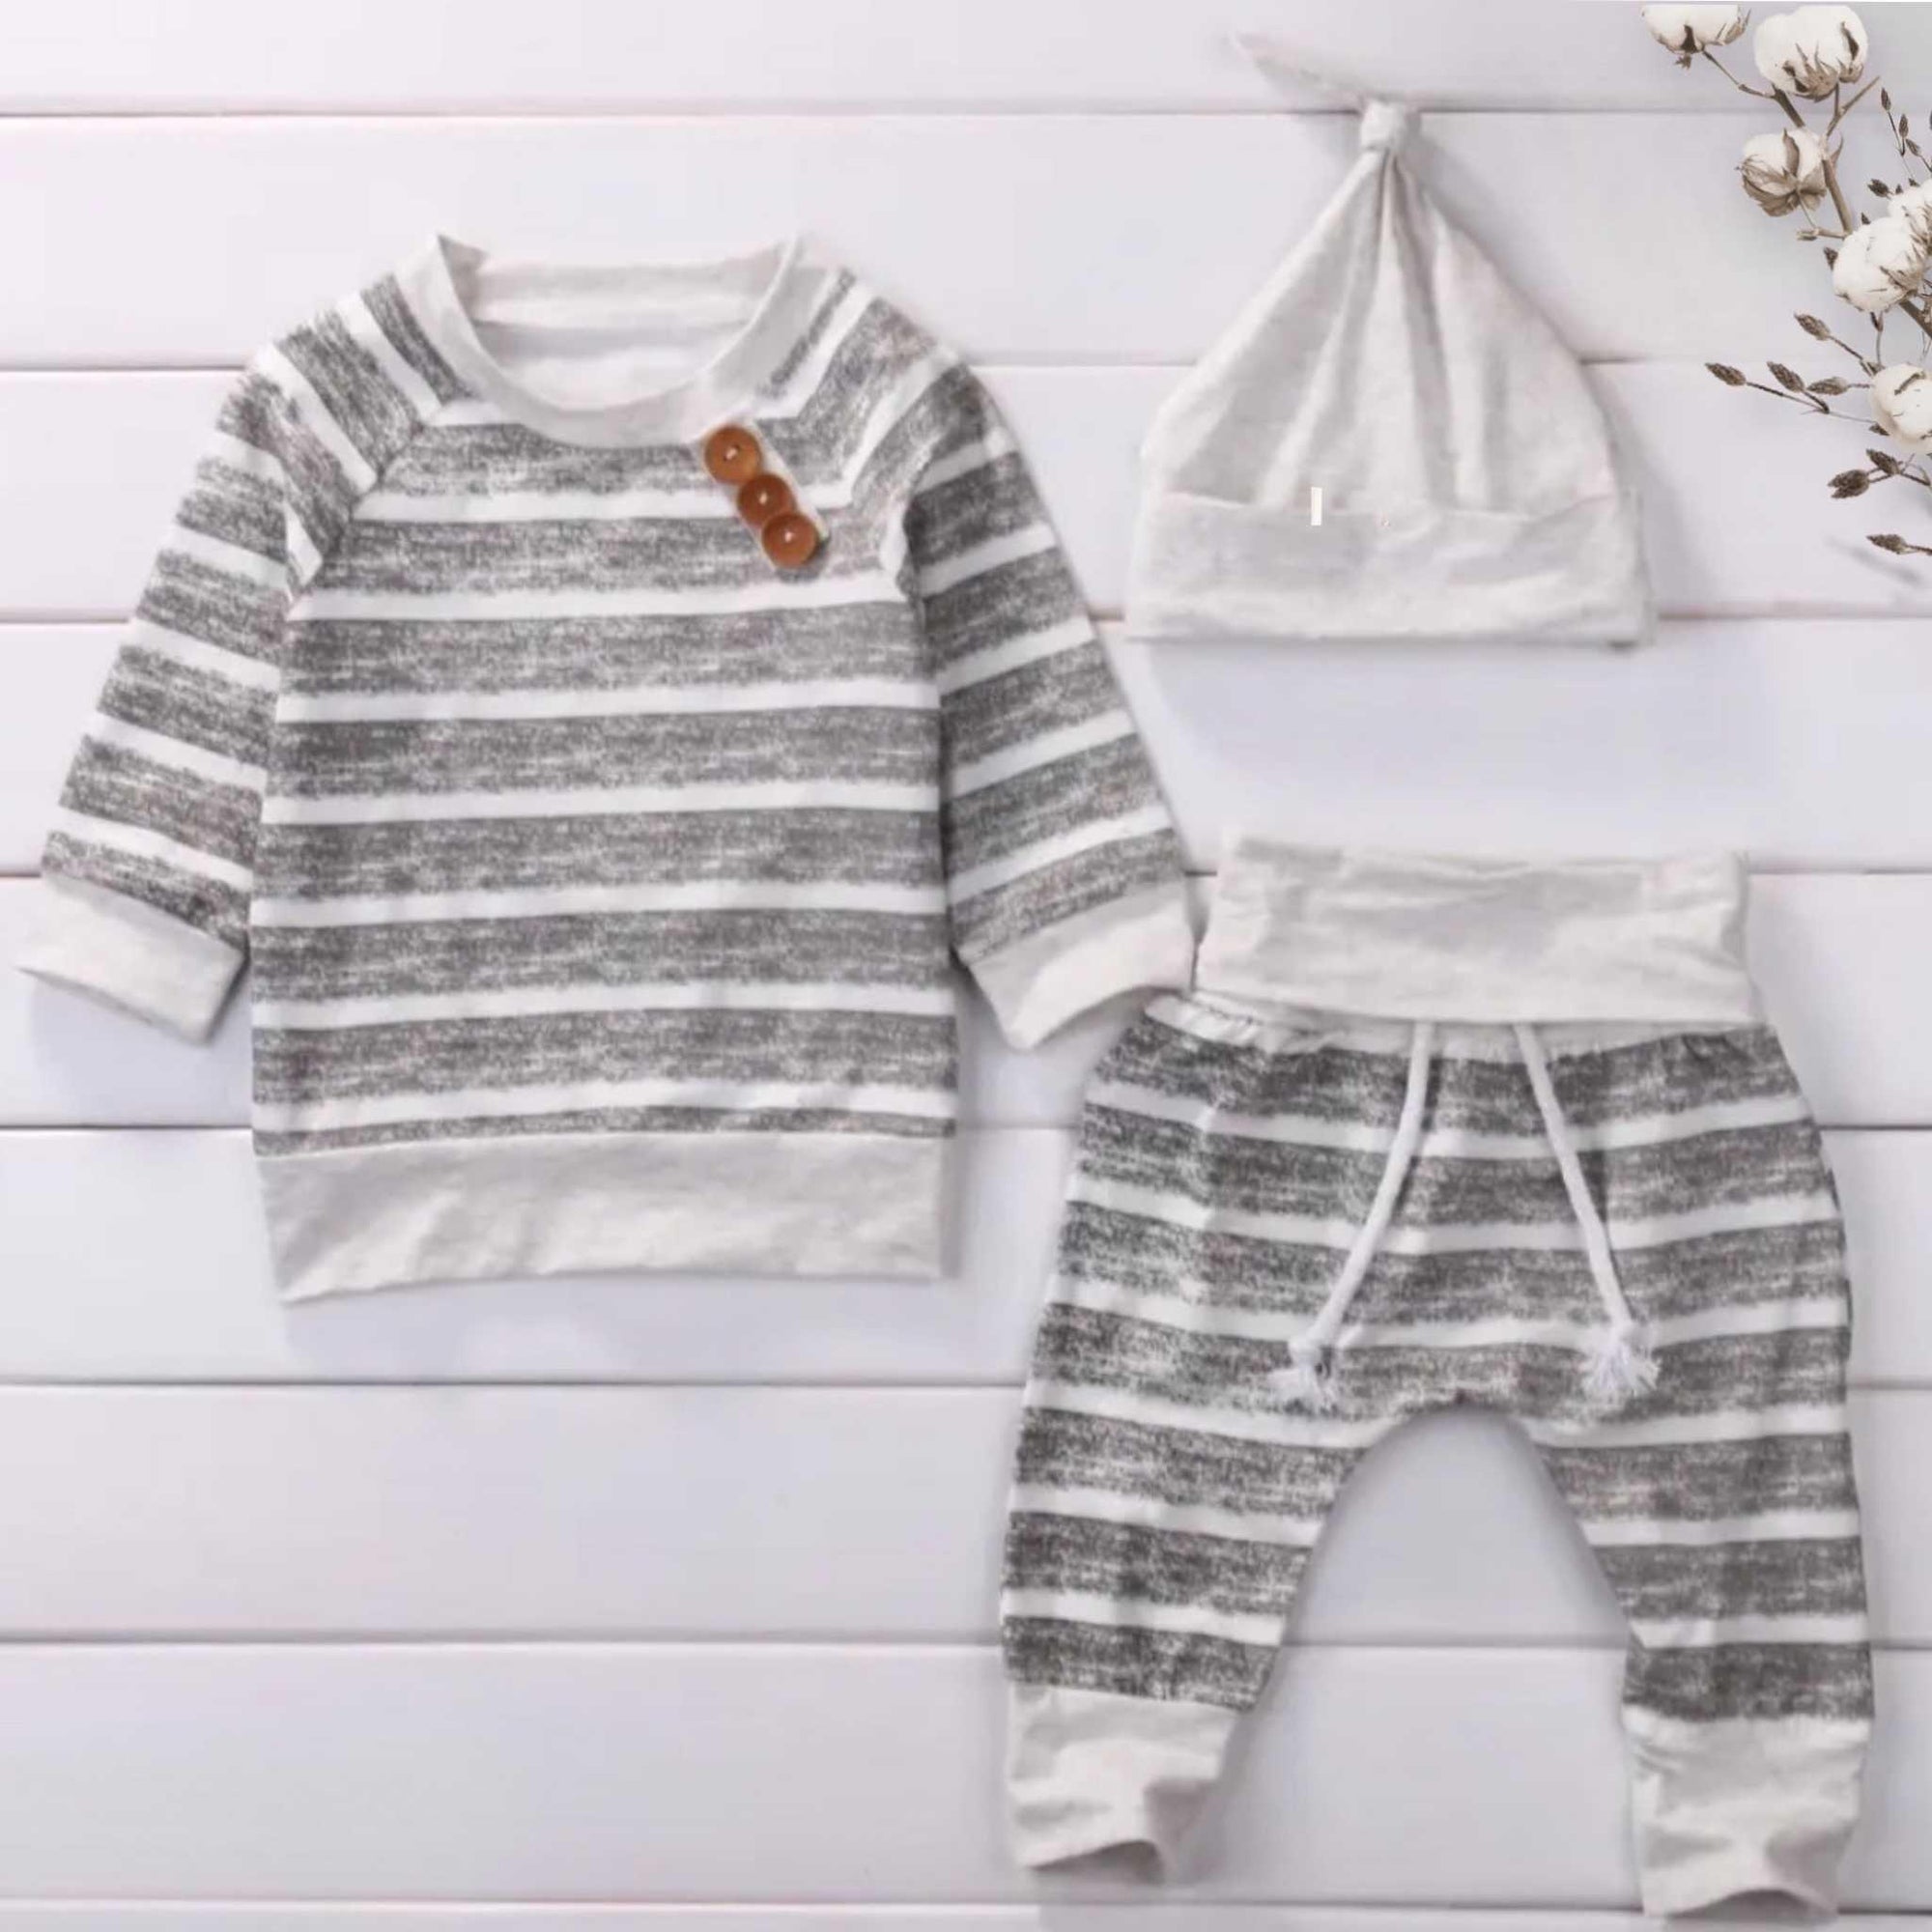 Baby Boy Gray and White Striped Top Pants and Hat Clothing Set, Color